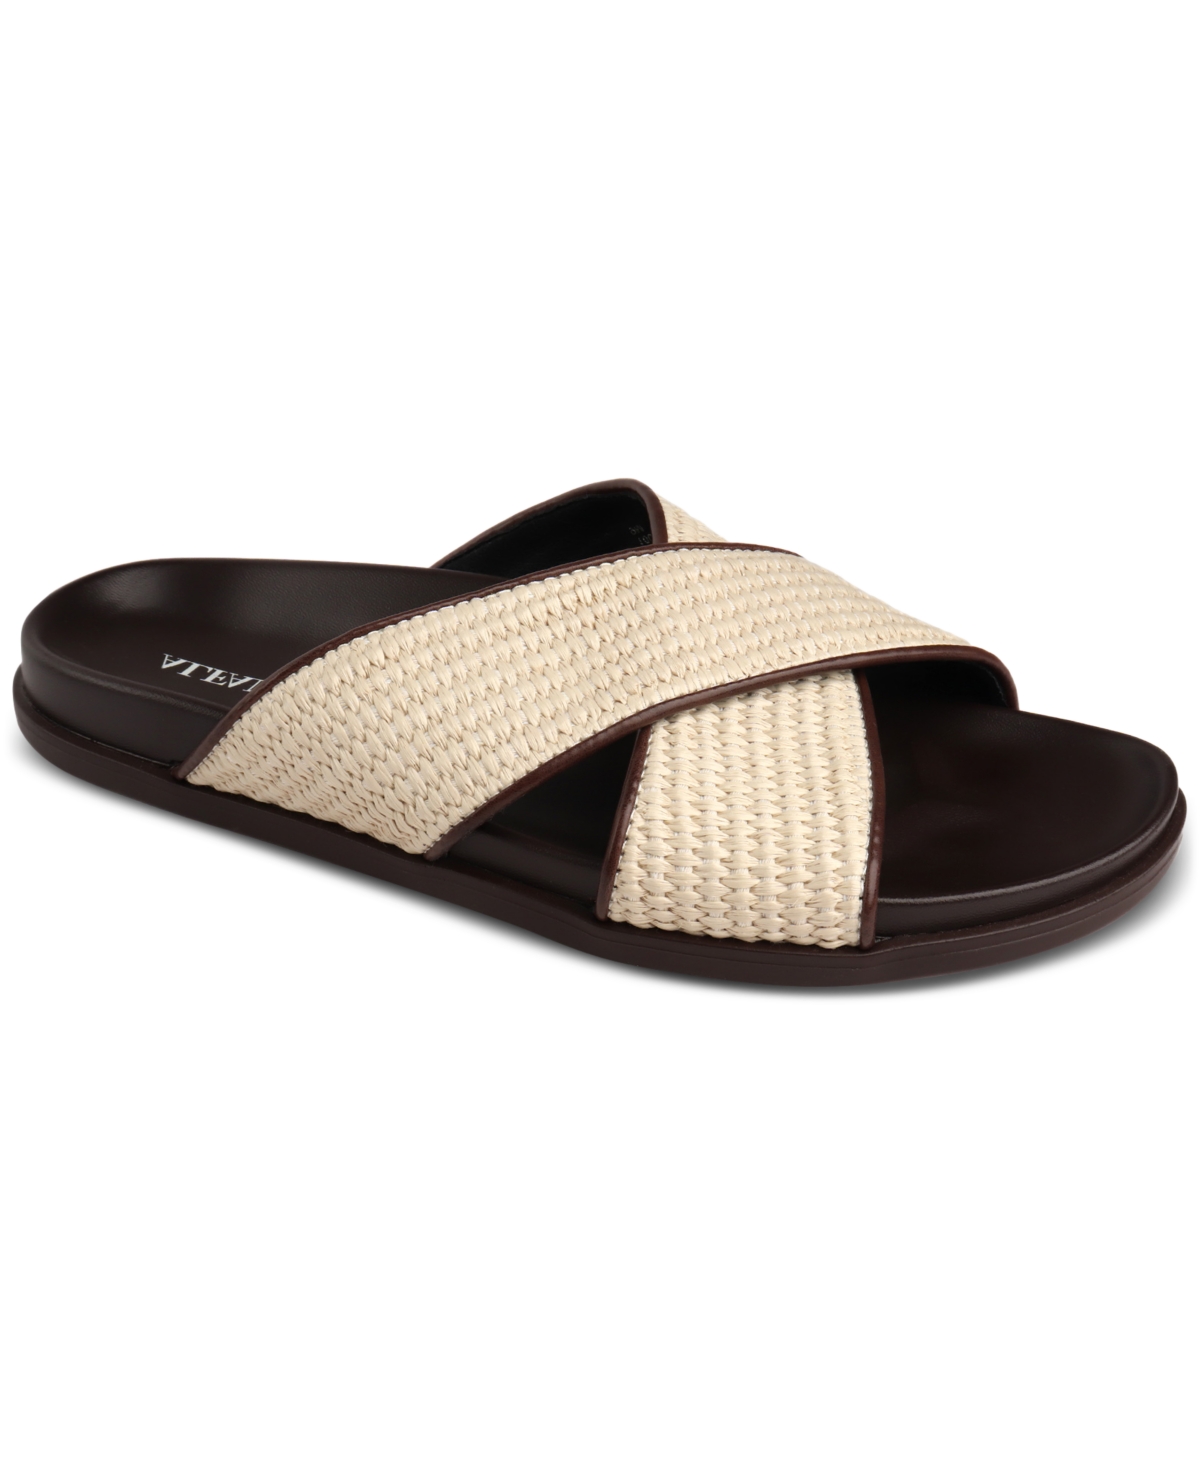 Men's Whitter Faux-Raffia Crossed Strap Sandals, Created for Macy's - Cream